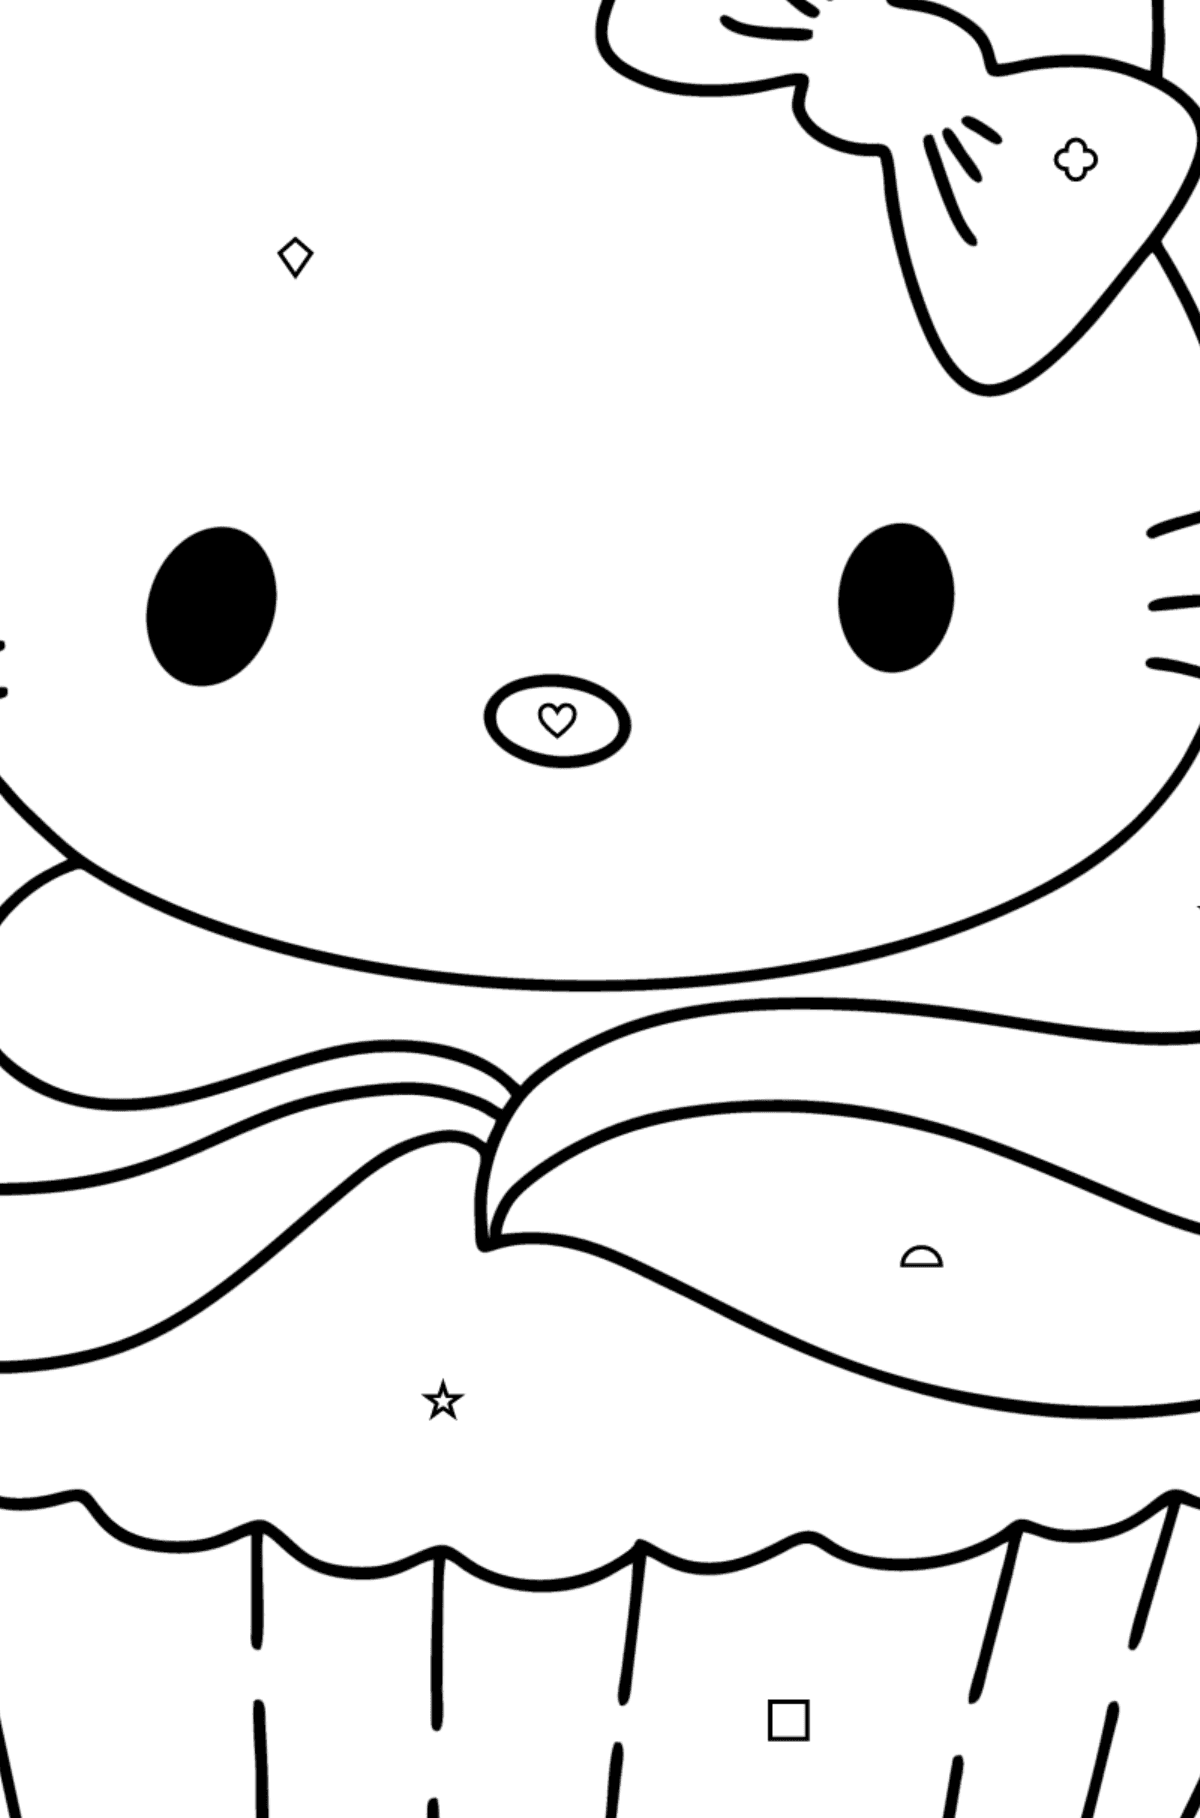 Hello Kitty cupcake coloring page - Coloring by Geometric Shapes for Kids